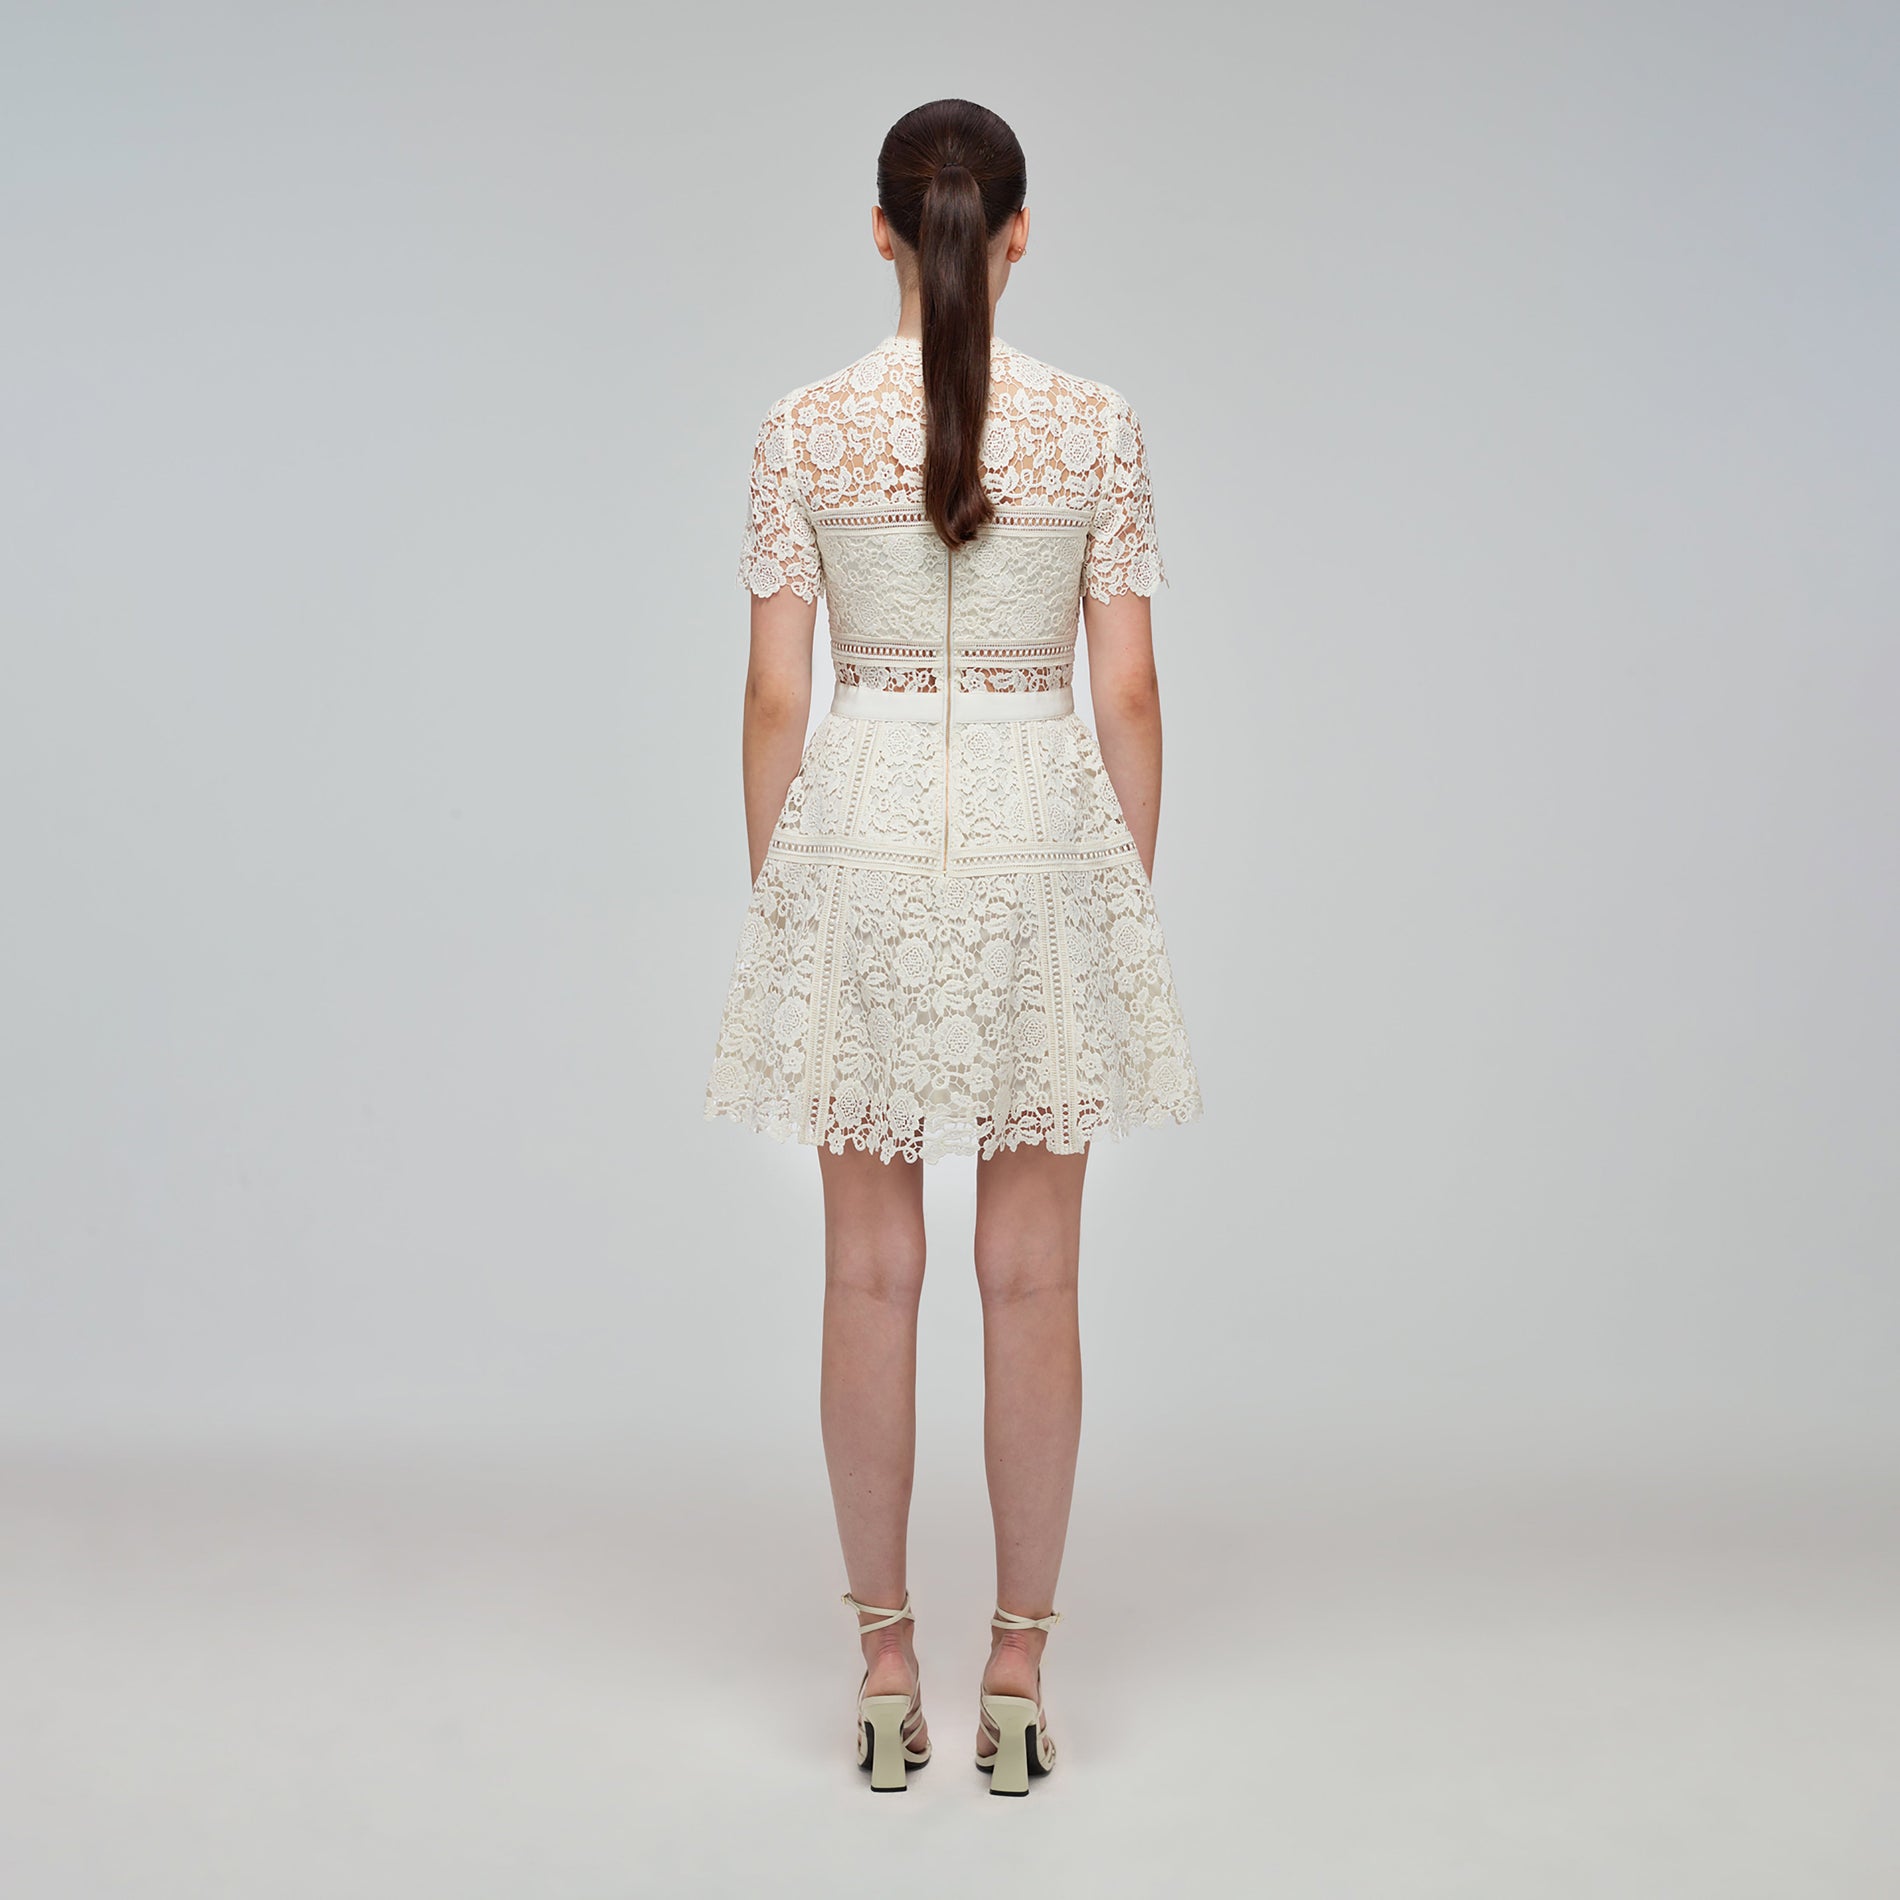 A woman wearing the Ivory Floral Guipure Mini Dress